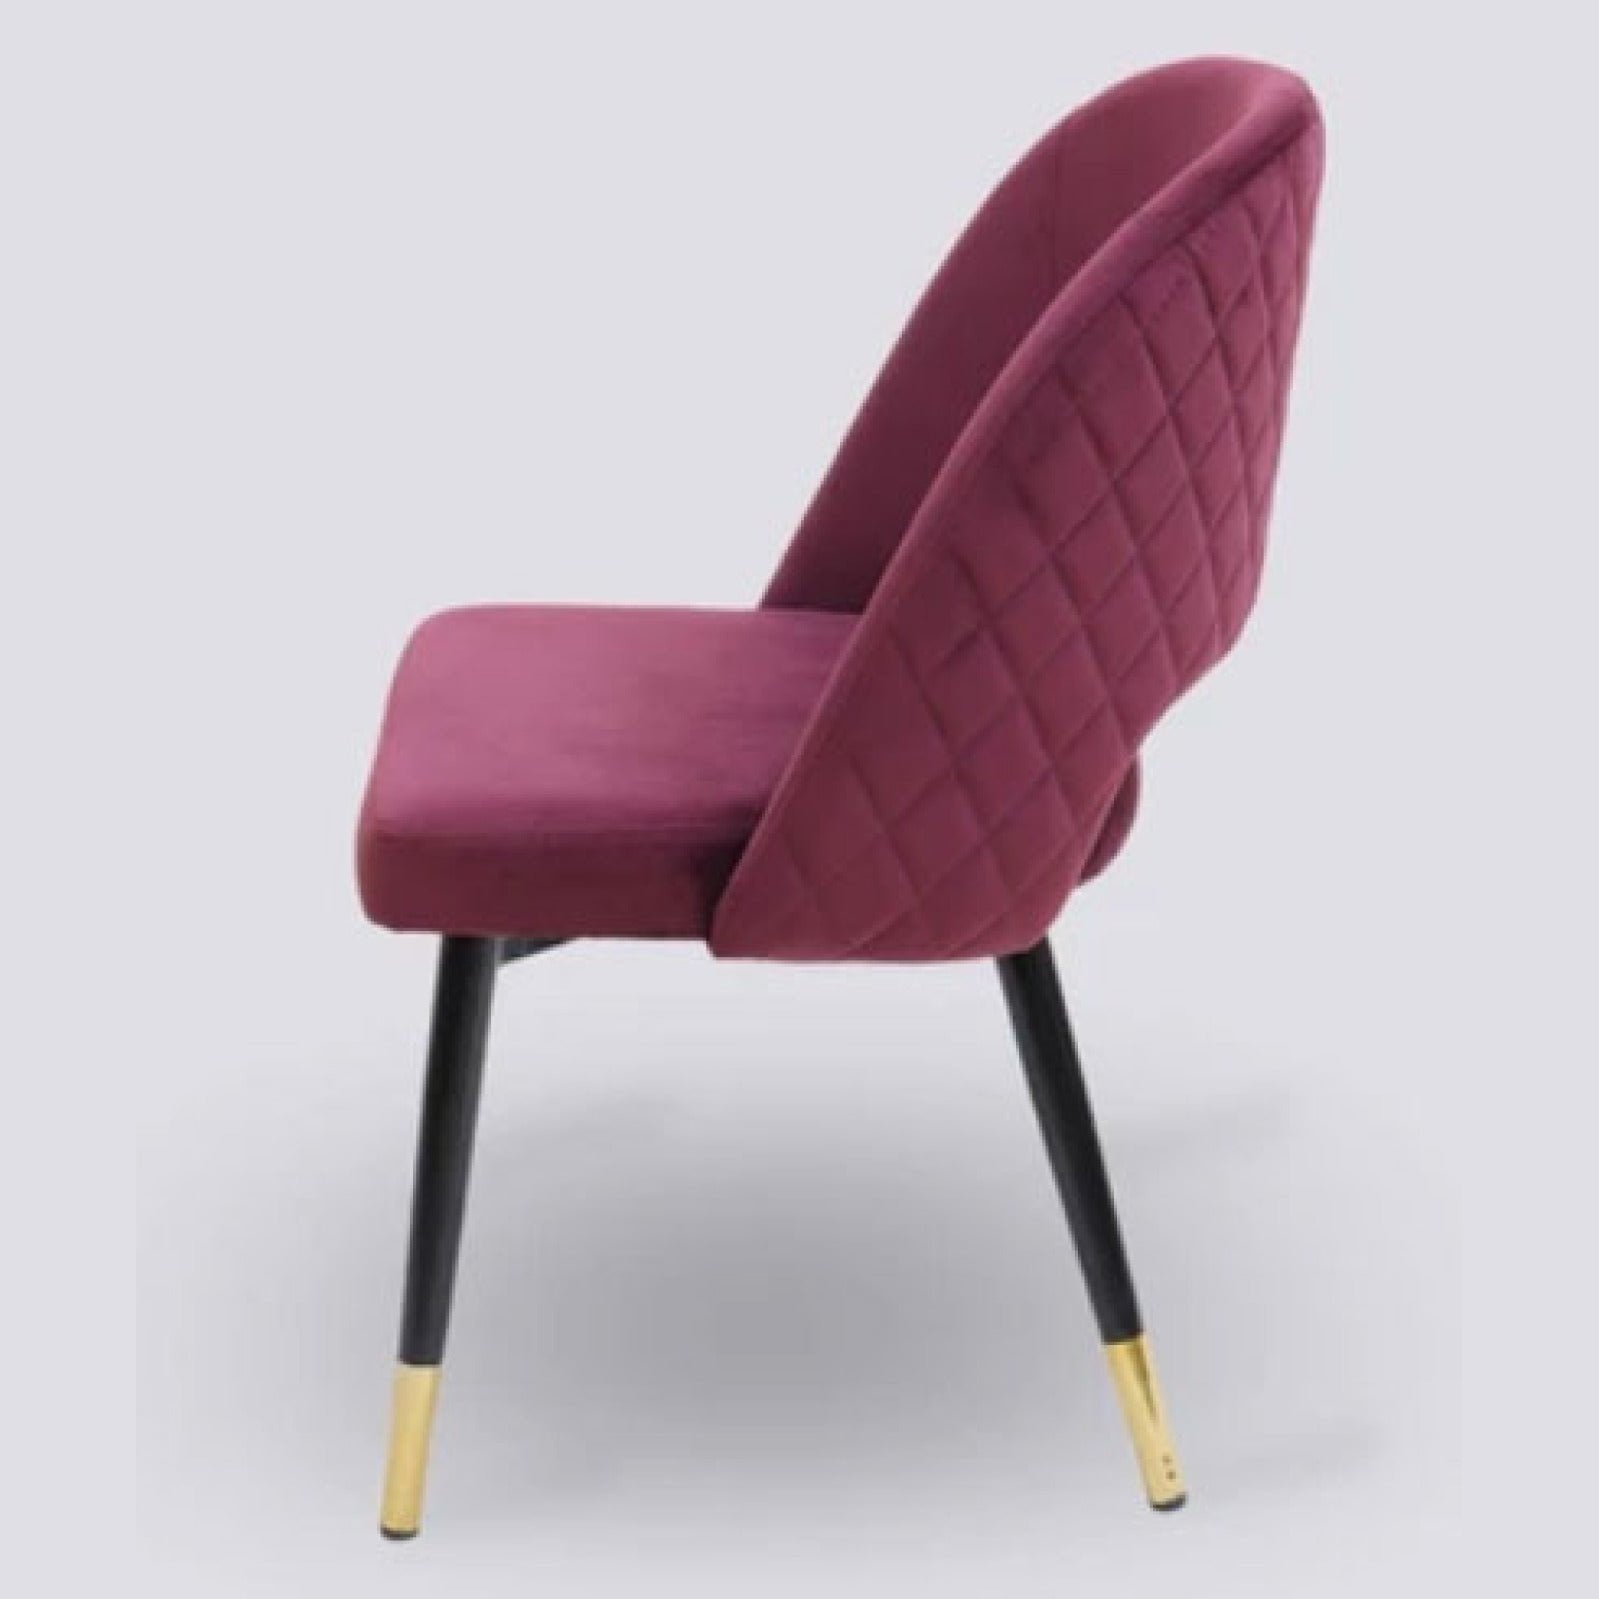 LUX-499 DINING CHAIR Mobel Furniture